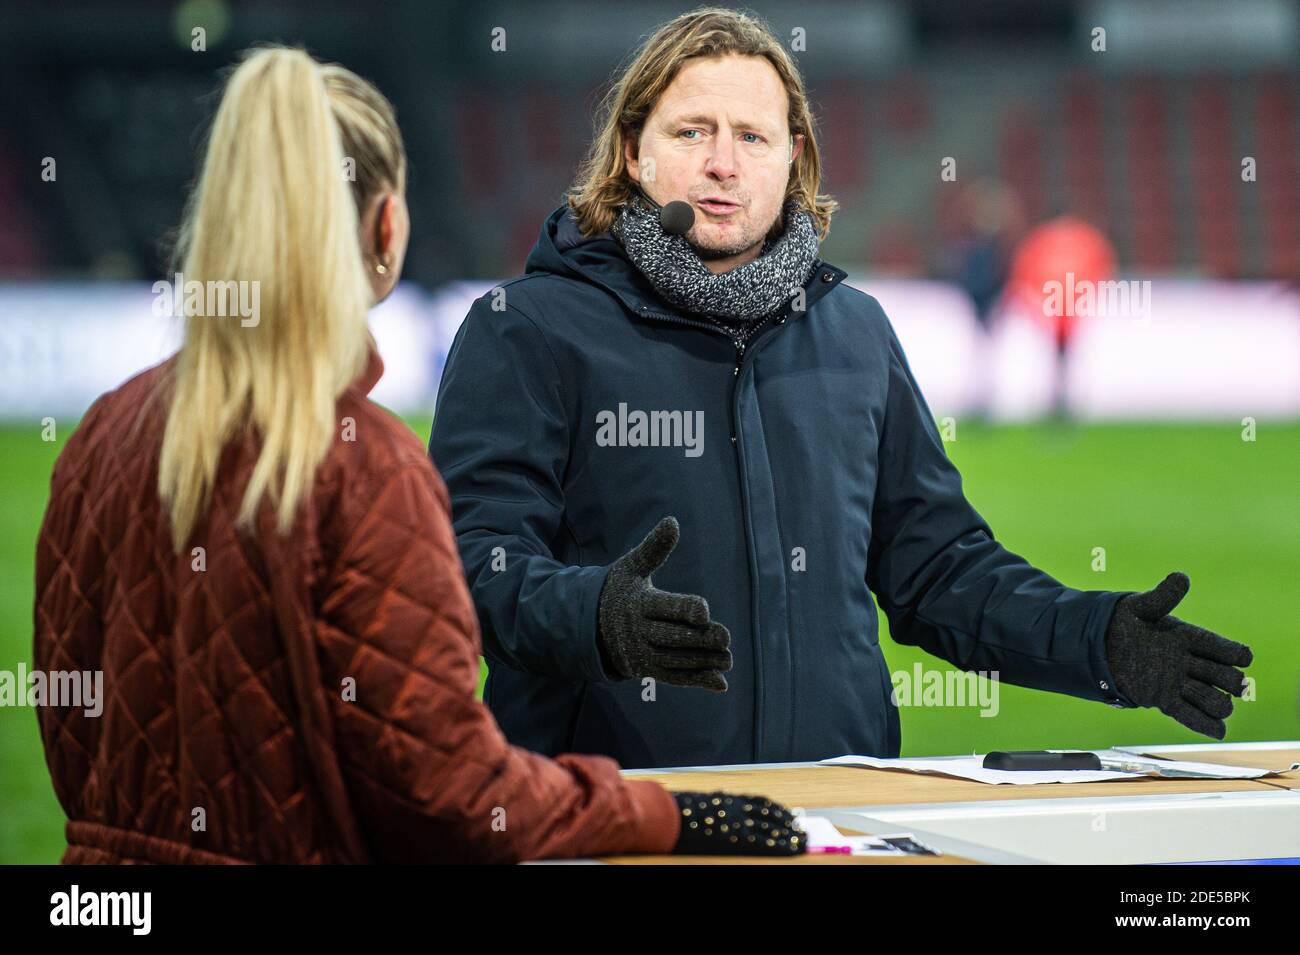 Herning, Denmark. 28th Nov, 2020. Former footballer and manager Bo  Henriksen seen as a TV pundit during the 3F Superliga match between FC  Midtjylland and Aalborg Boldklub at MCH Arena in Herning. (